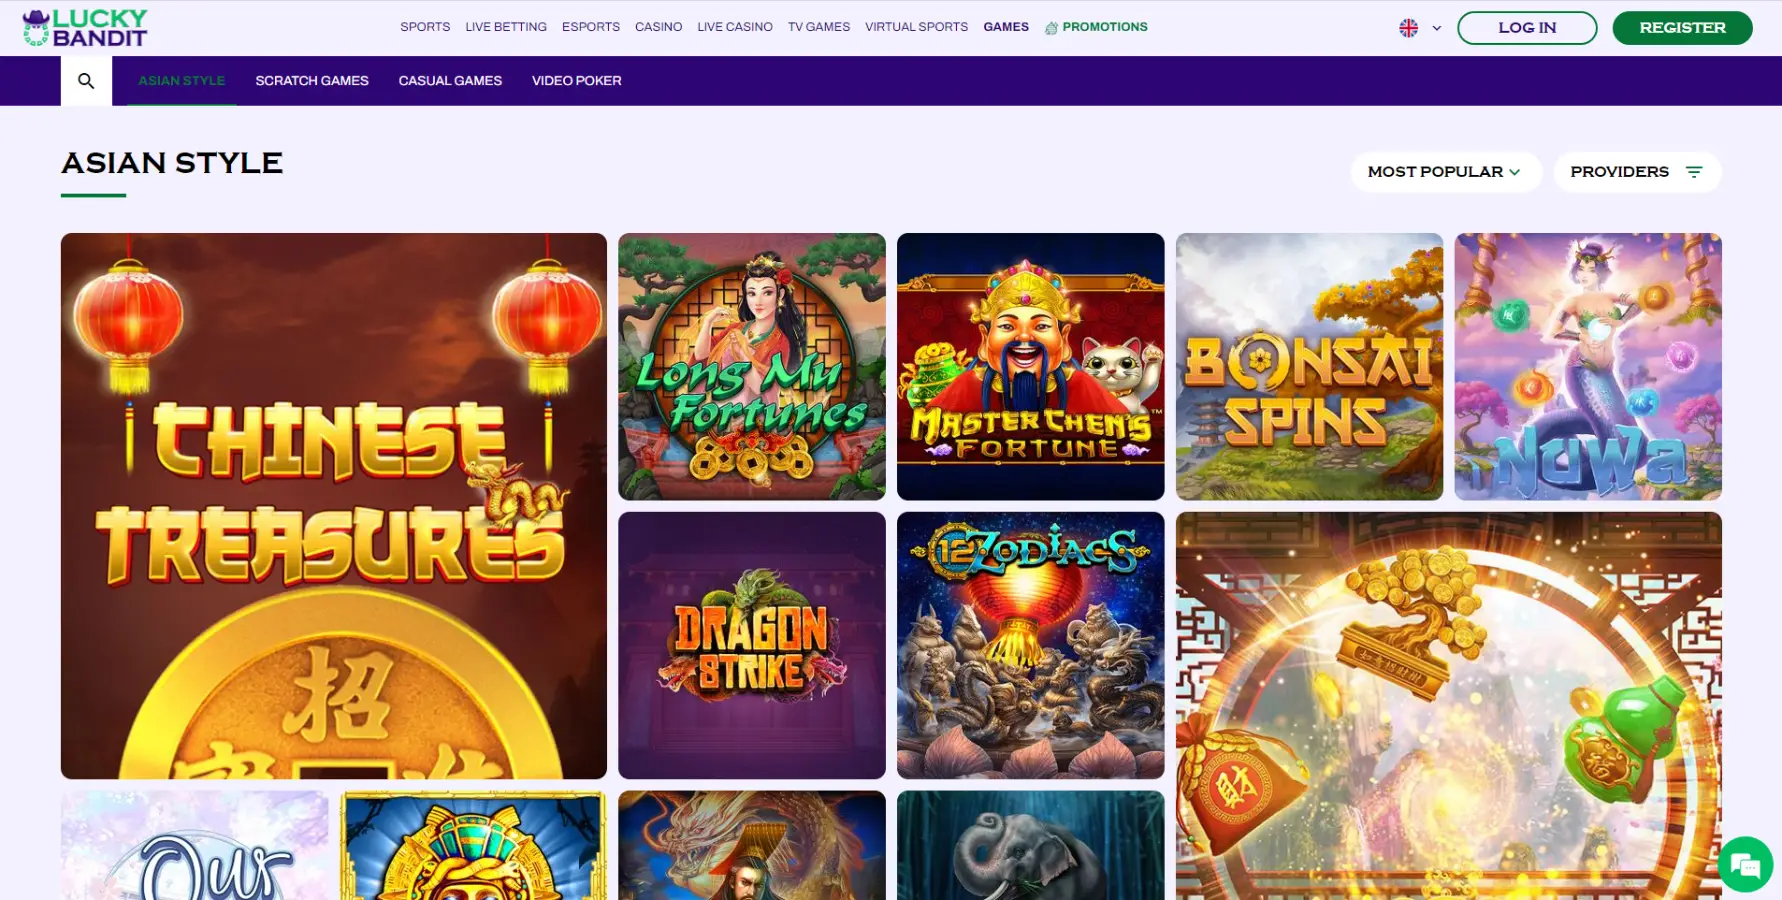 Games and Software Providers at Lucky Bandit Casino